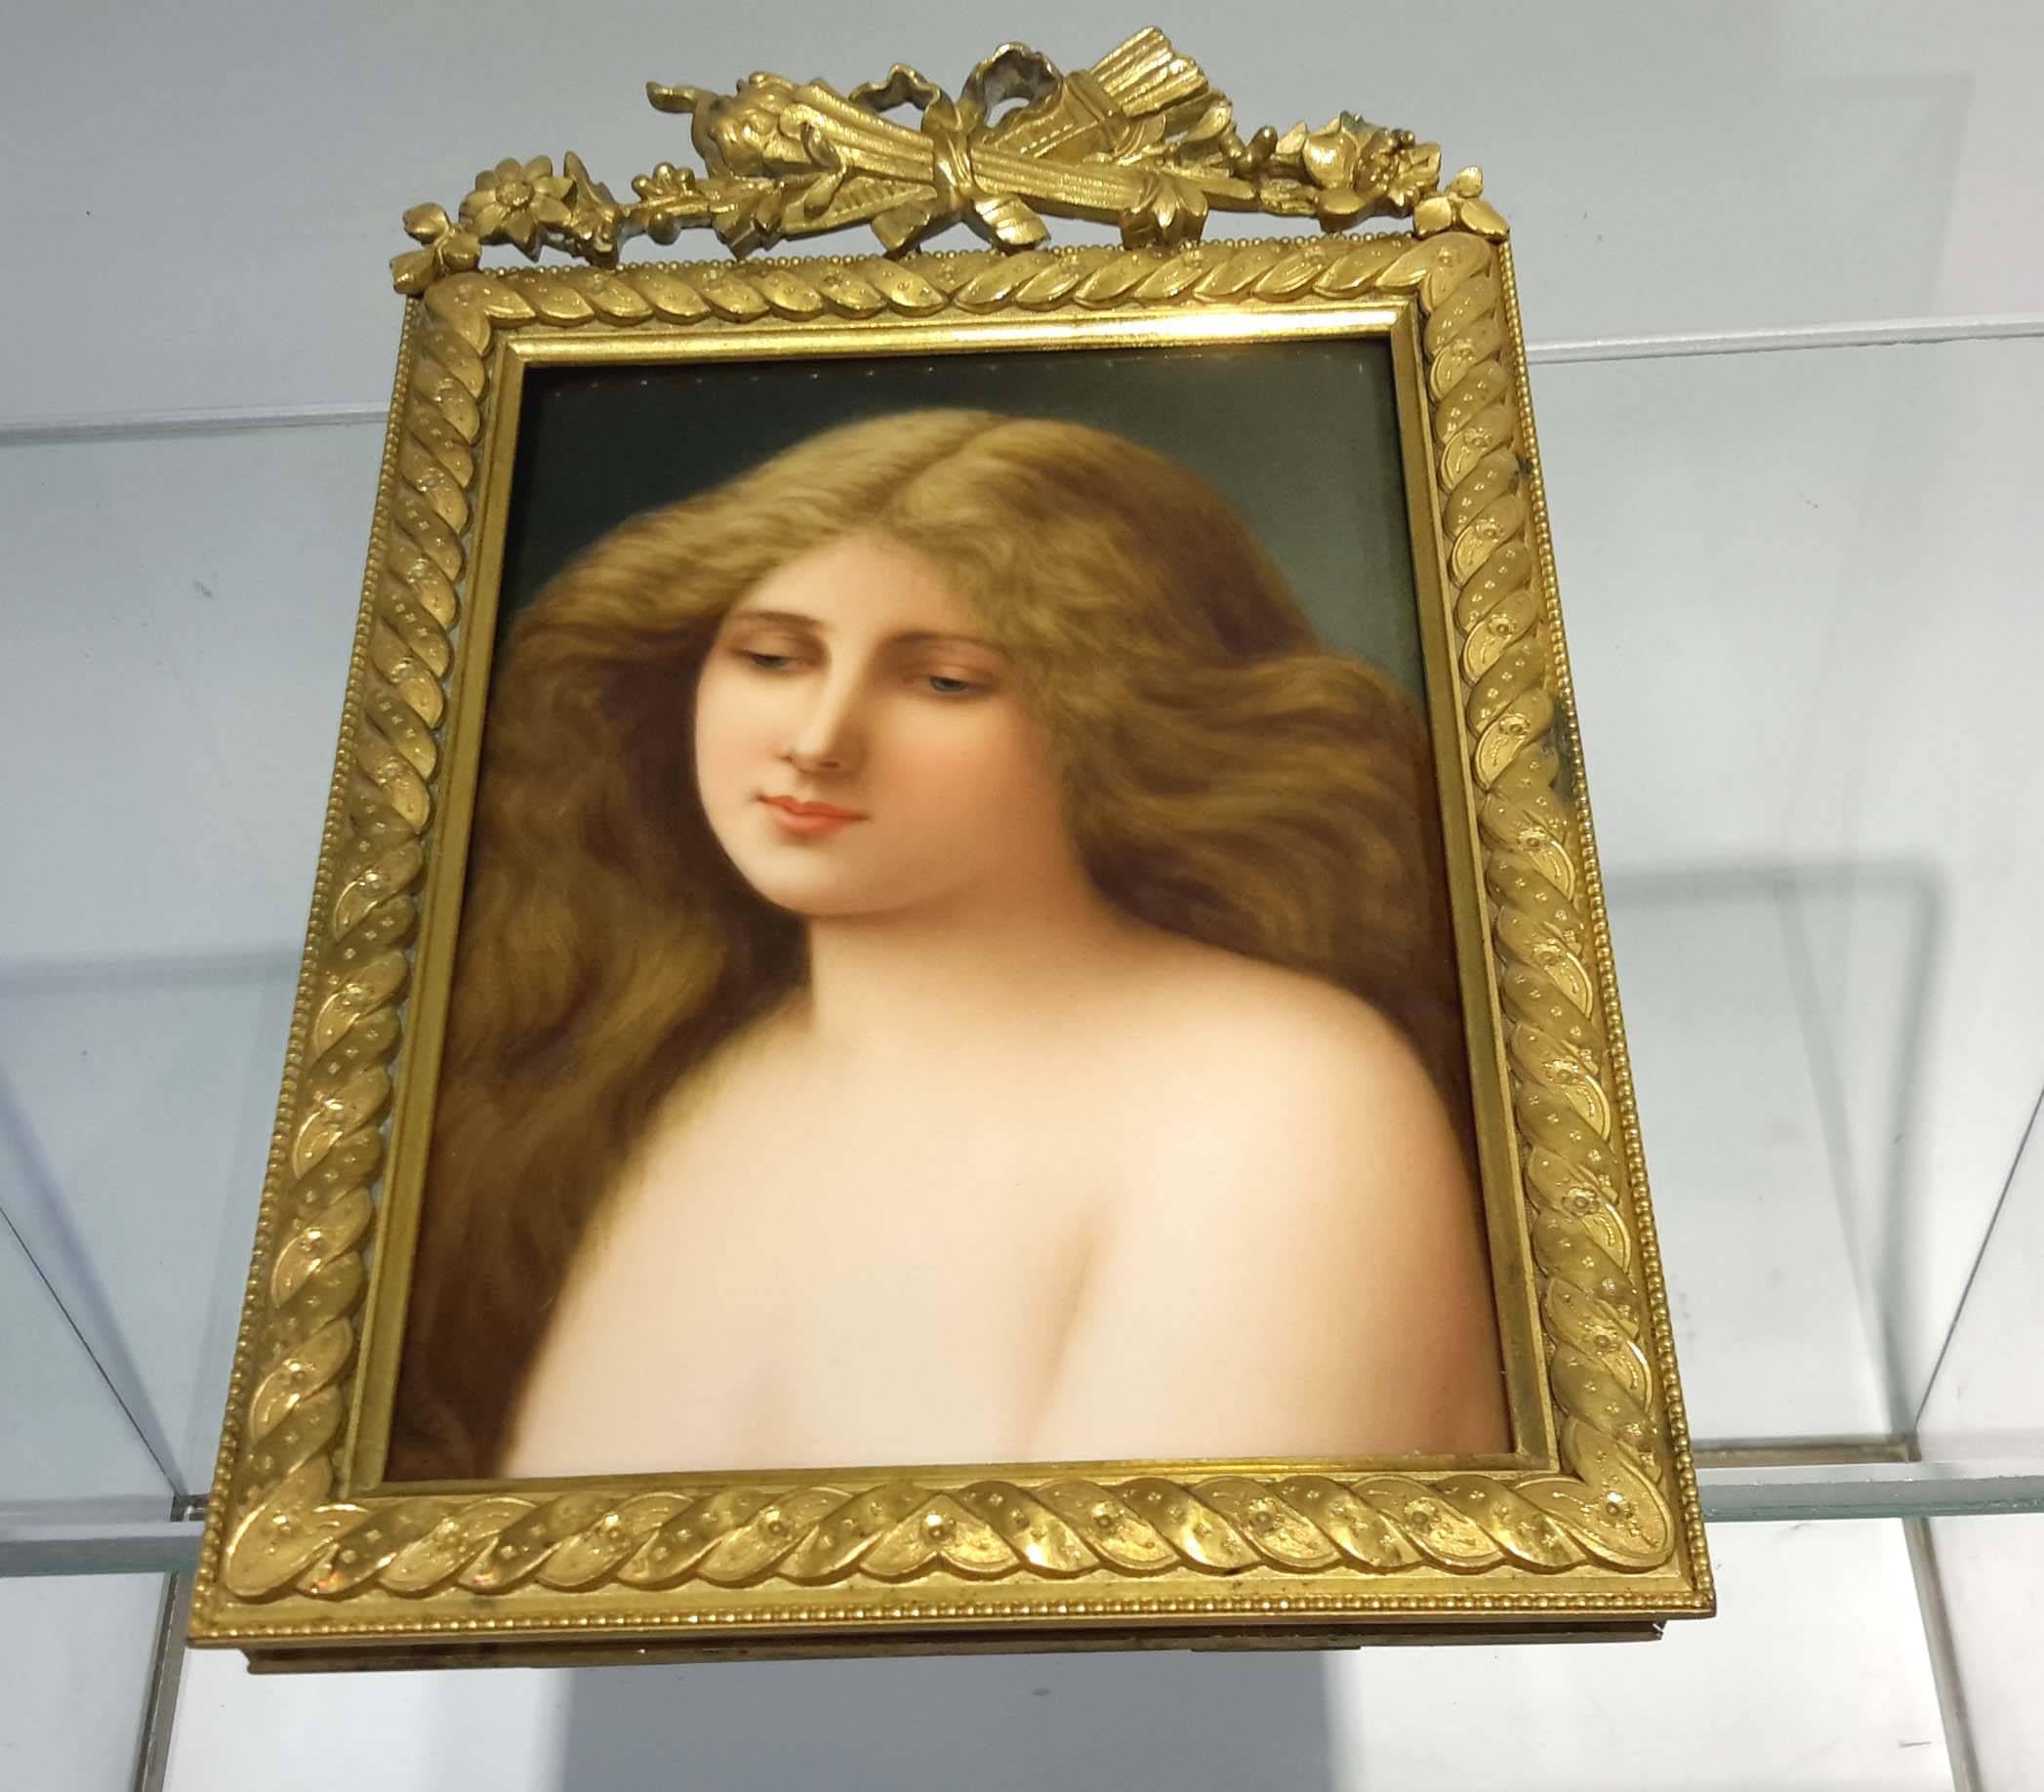 German KPM Berlin Porcelain Plaque of Young Beauty, Signed Wagner, 19th Century